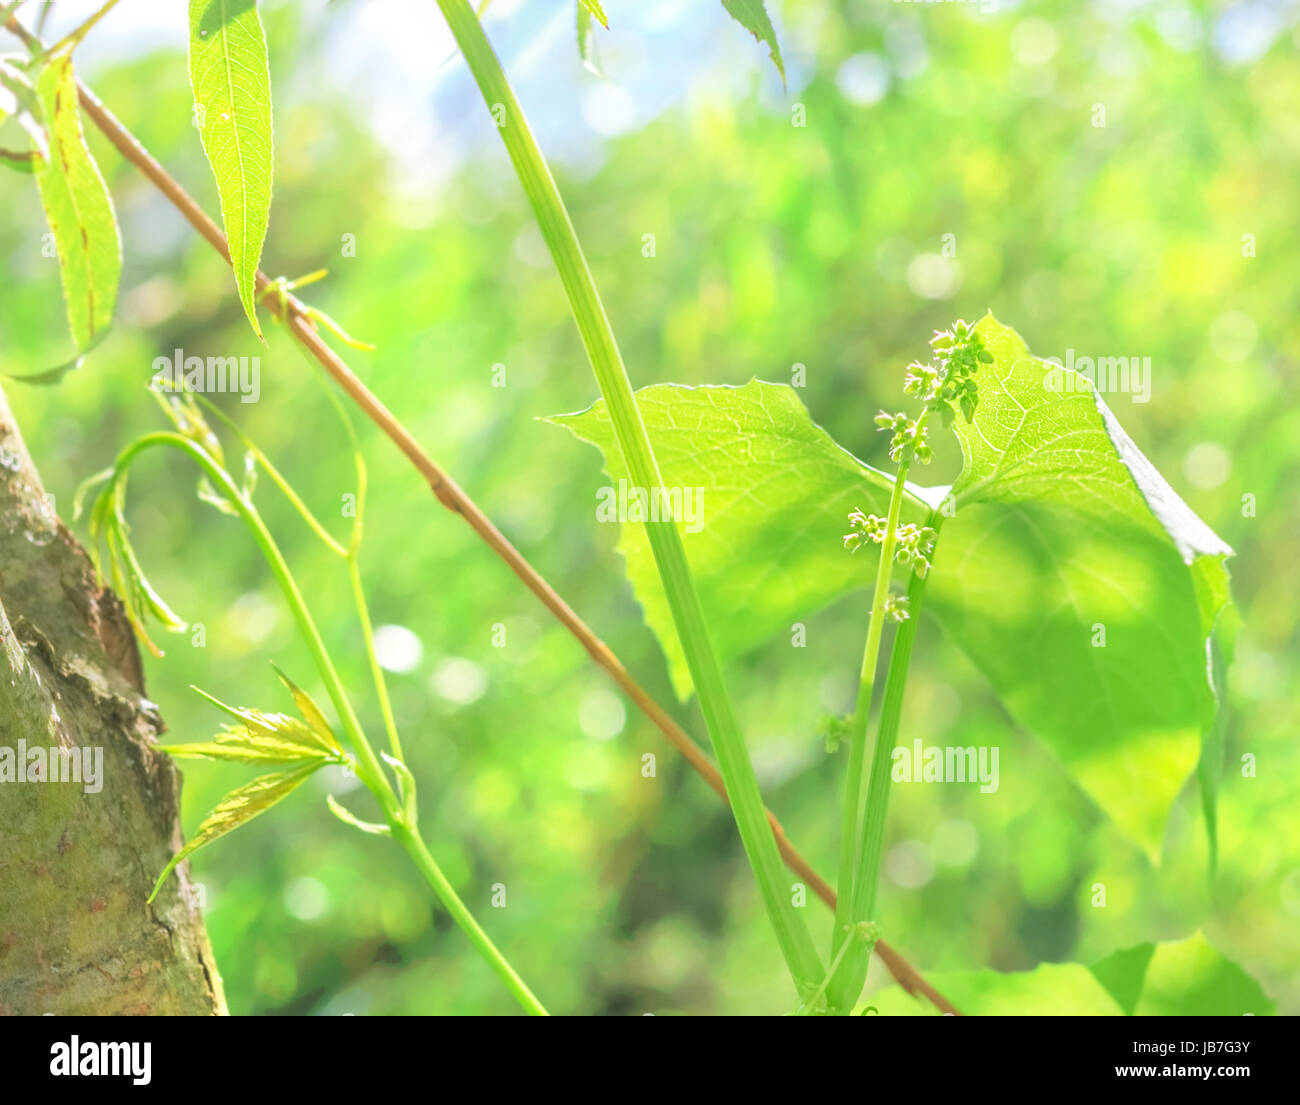 Best green leaves of wild grapes in sunlight Stock Photo